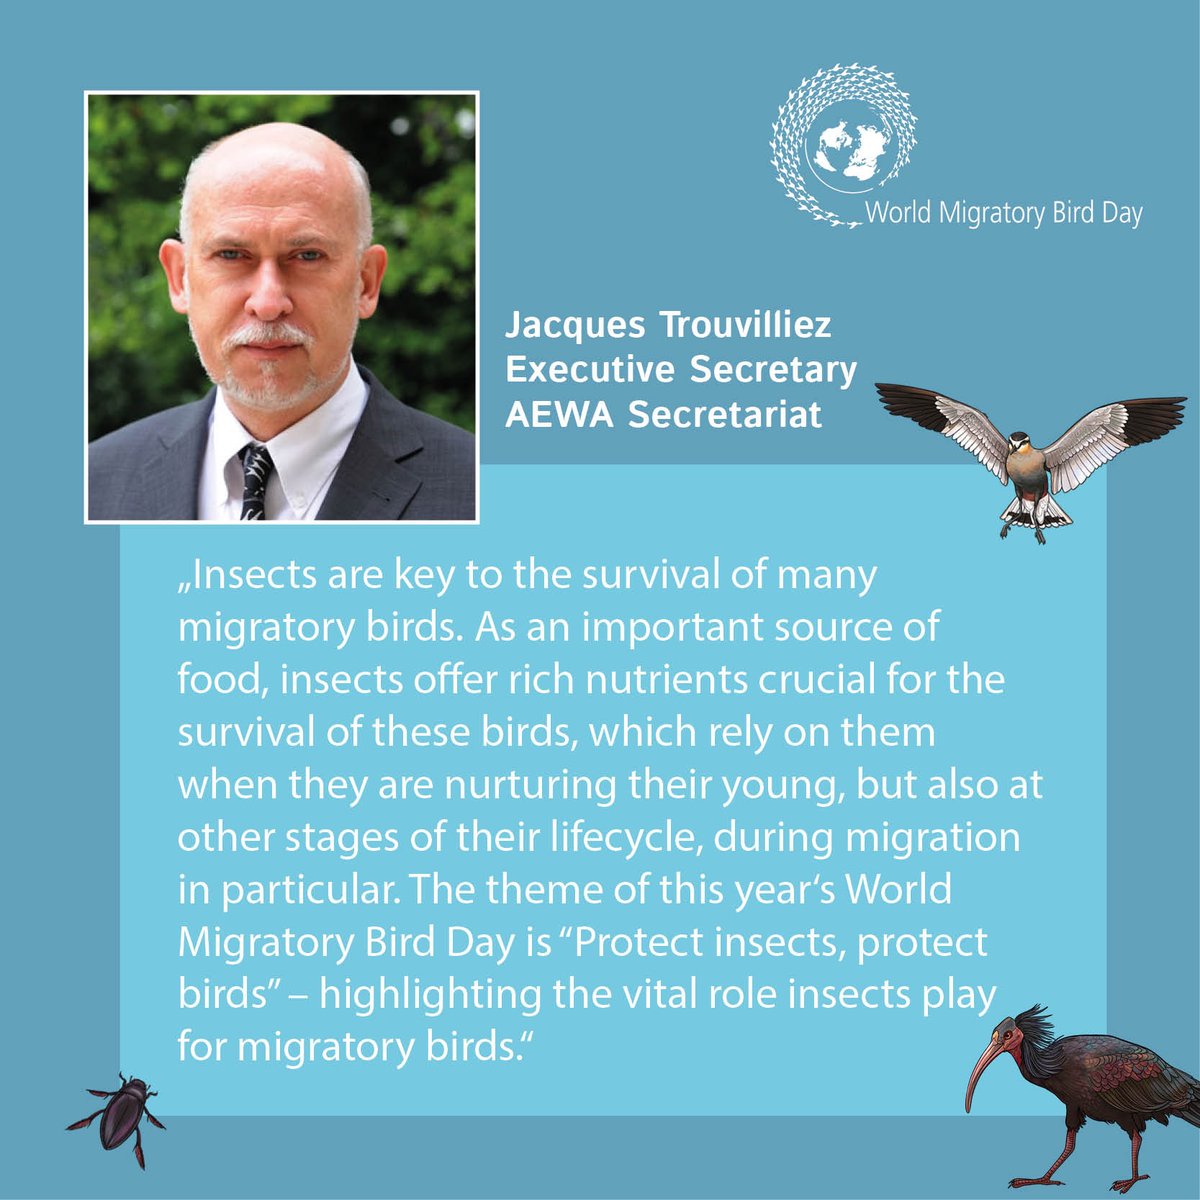 #WorldMigratoryBirdDay is coming up tomorrow and focuses on the importance of insects for migratory birds. Insects offer rich nutrients crucial for the survival of birds, which rely on them when they are nurturing their young and during migration. ⬇️ worldmigratorybirdday.org